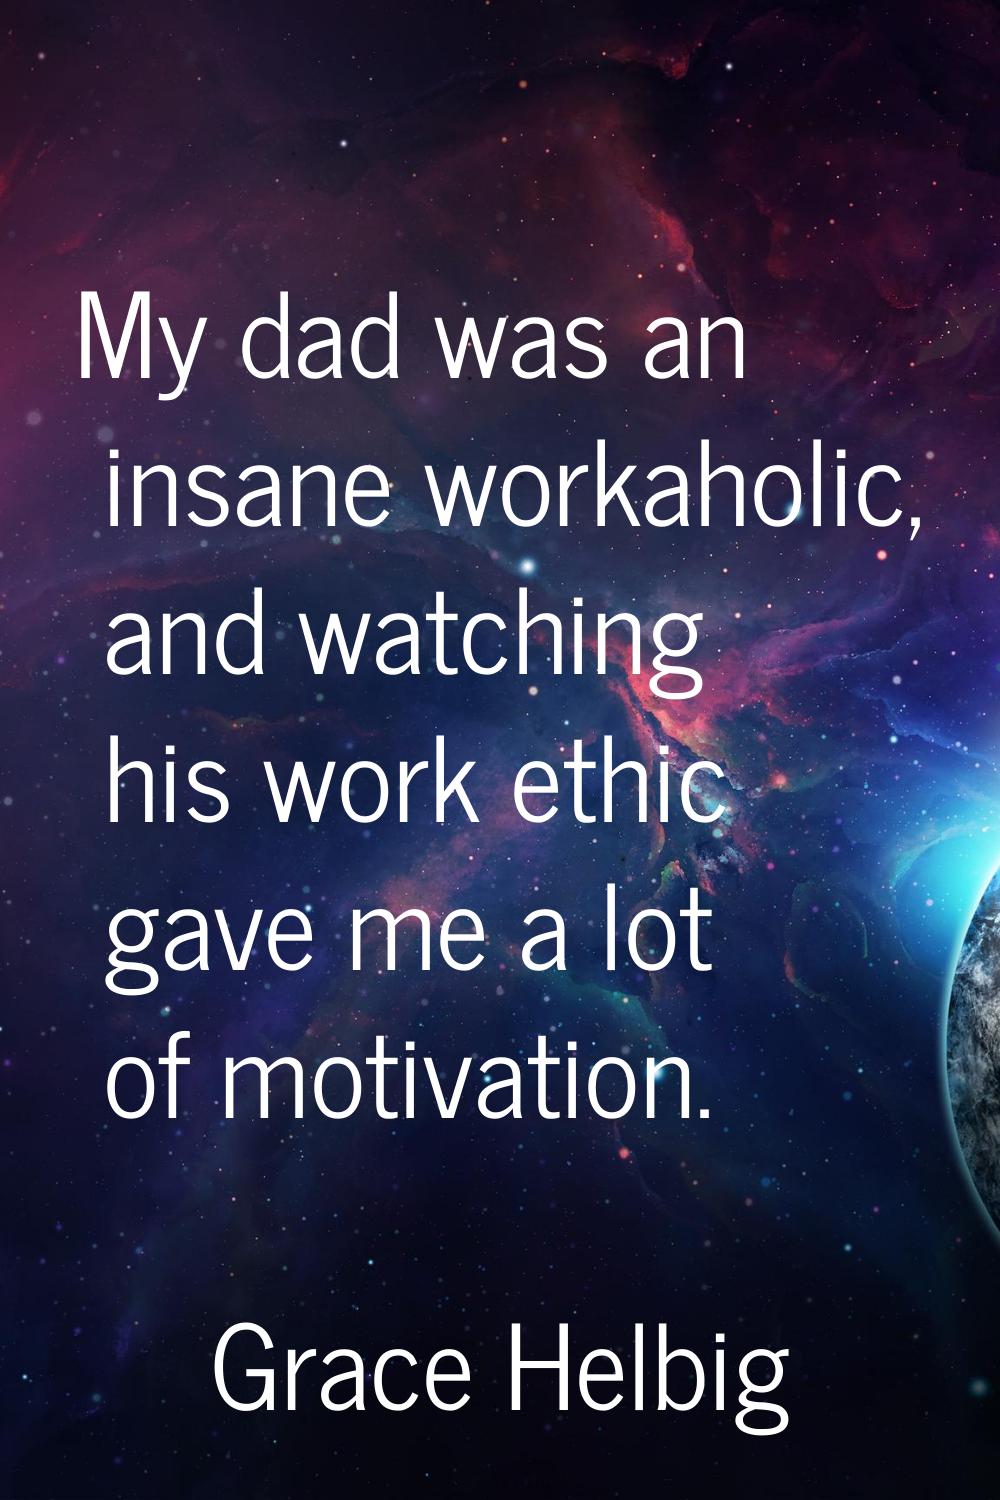 My dad was an insane workaholic, and watching his work ethic gave me a lot of motivation.